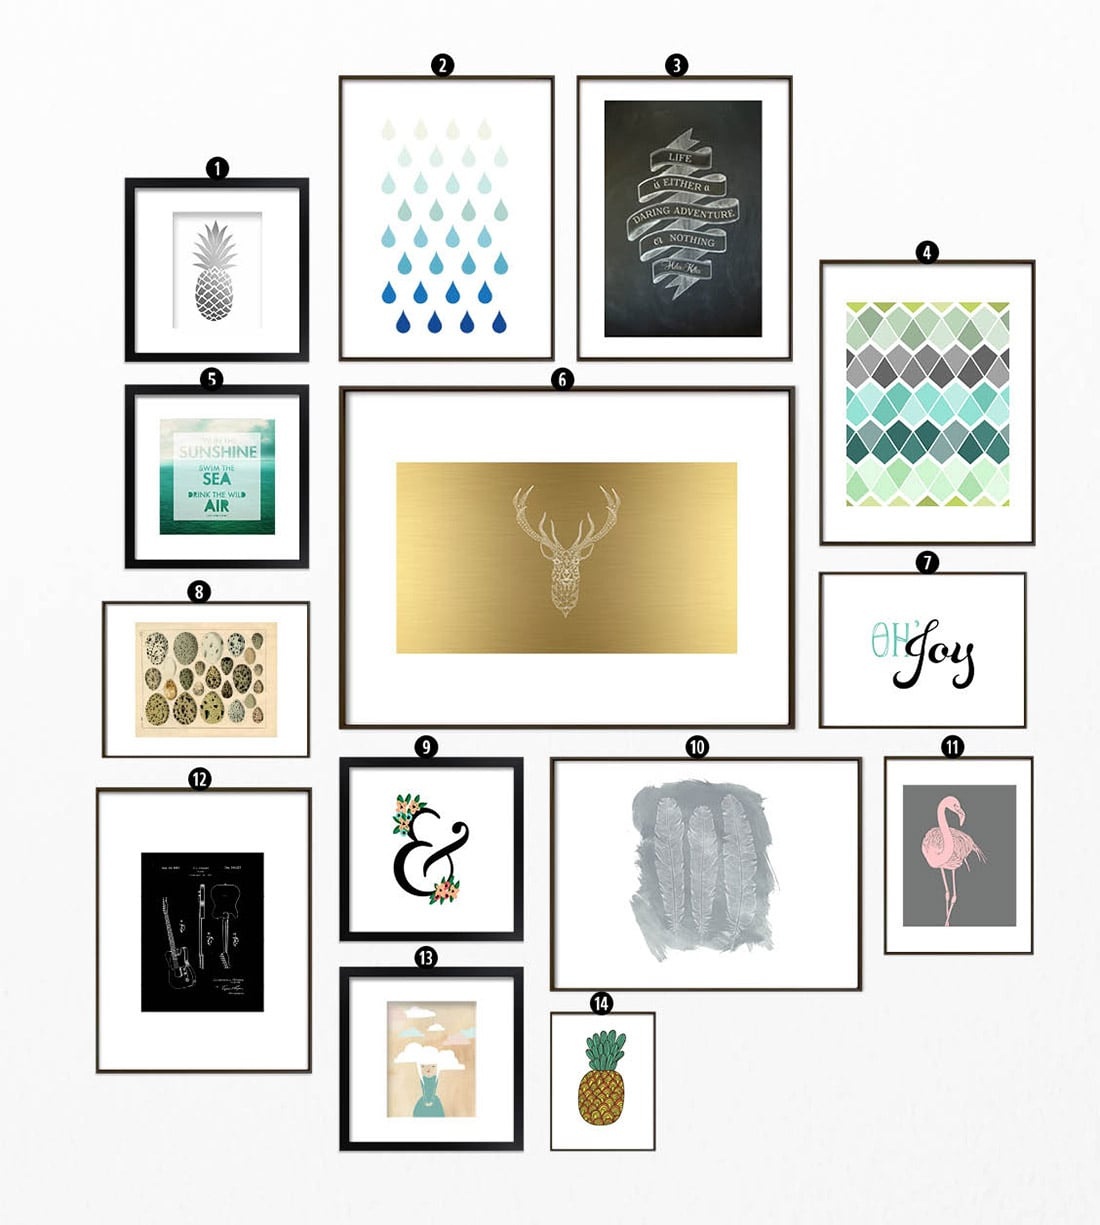 Roundup: Free Printables For Gallery Walls • Little Gold Pixel - Free Gallery Wall Printables